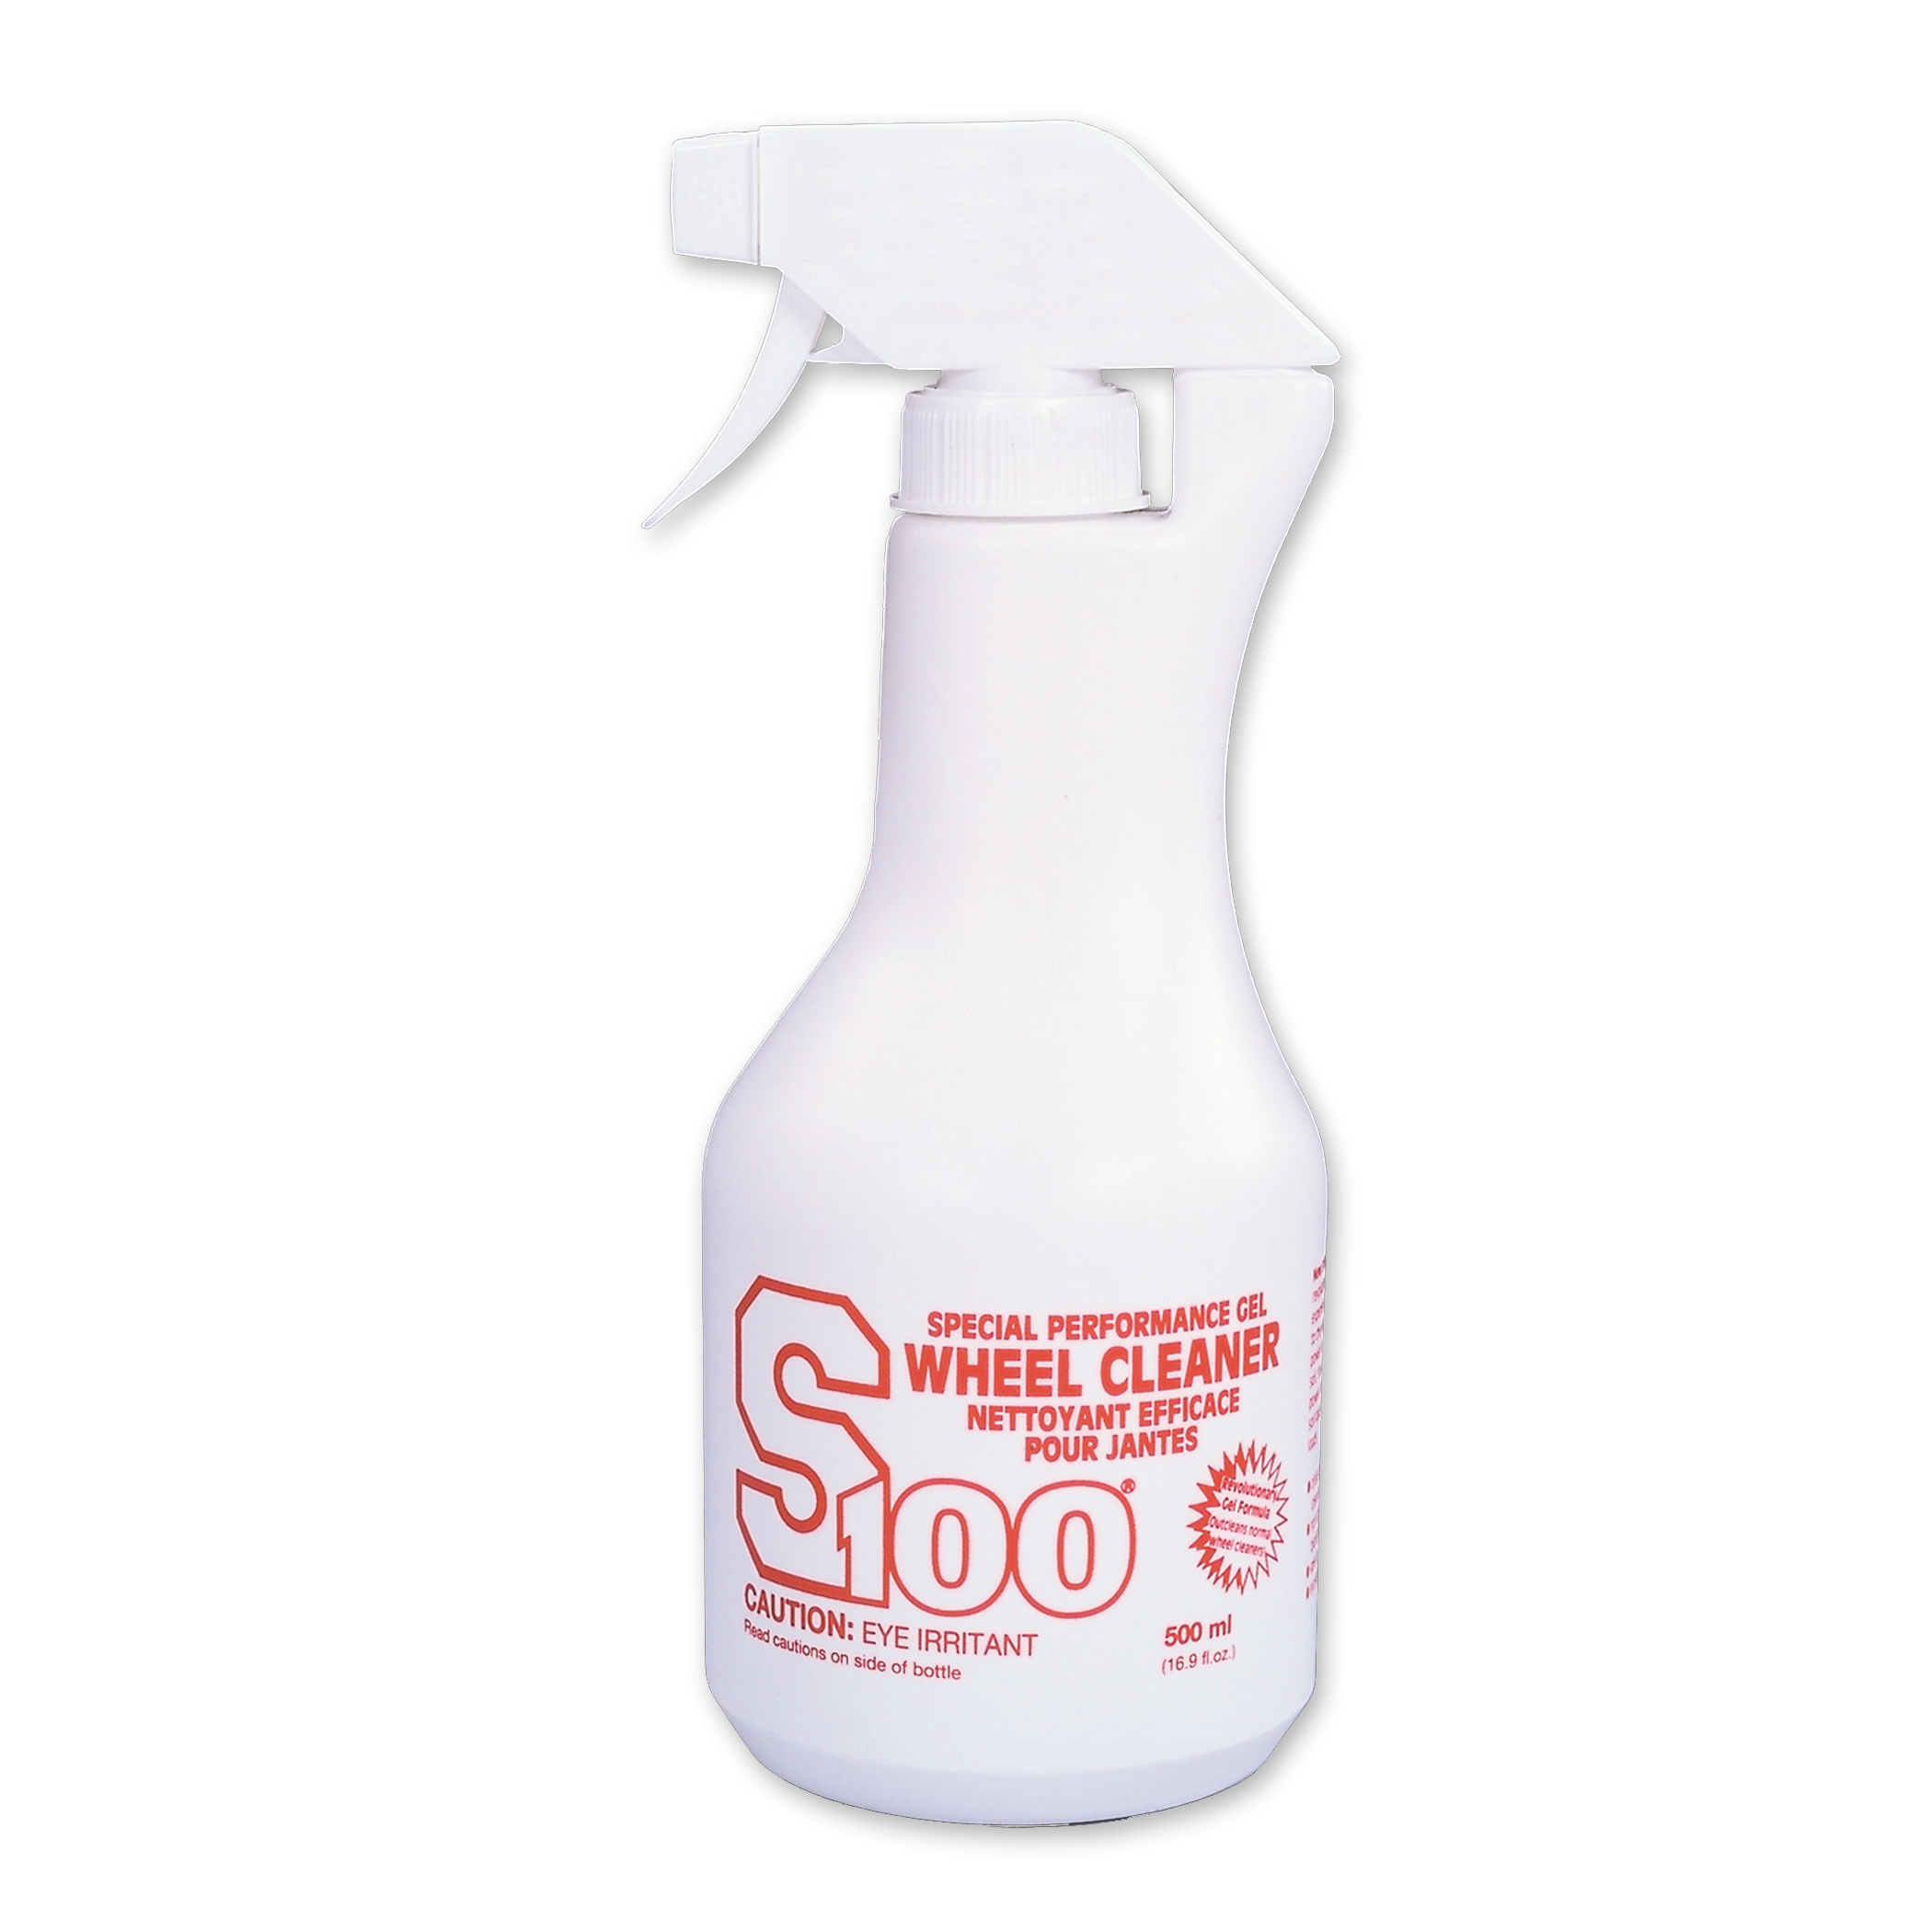 S100 Total Cycle Cleaner - S100 Cycle Care Products